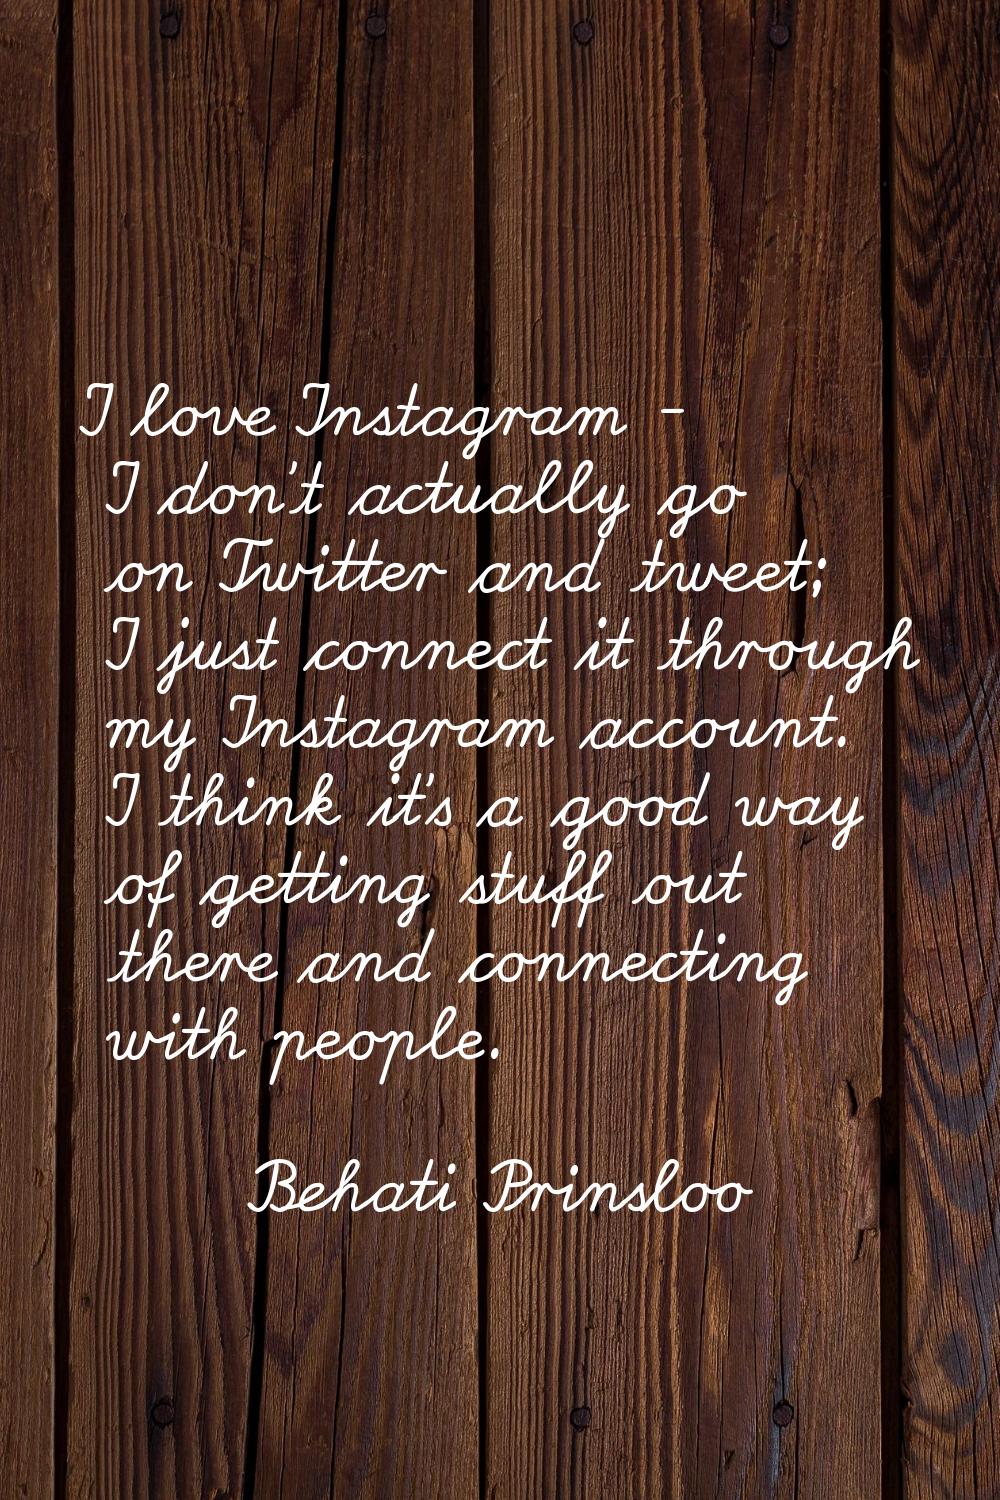 I love Instagram - I don't actually go on Twitter and tweet; I just connect it through my Instagram